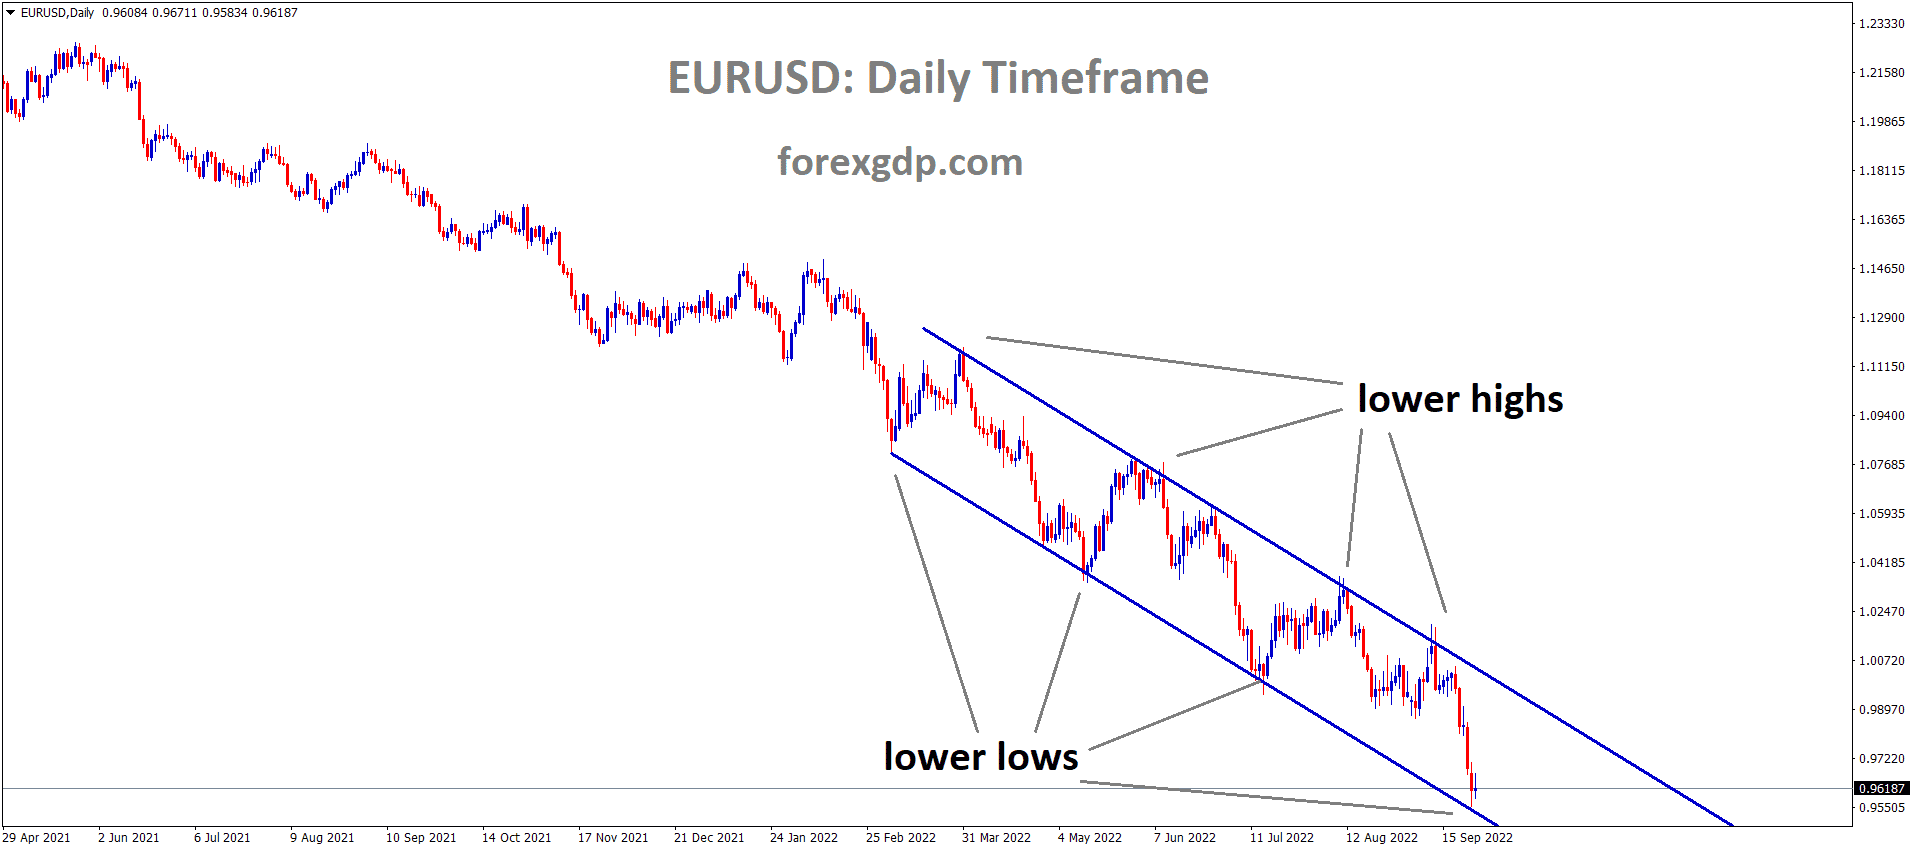 EURUSD is moving in the Descending channel and the market has reached the lower low area of the channel